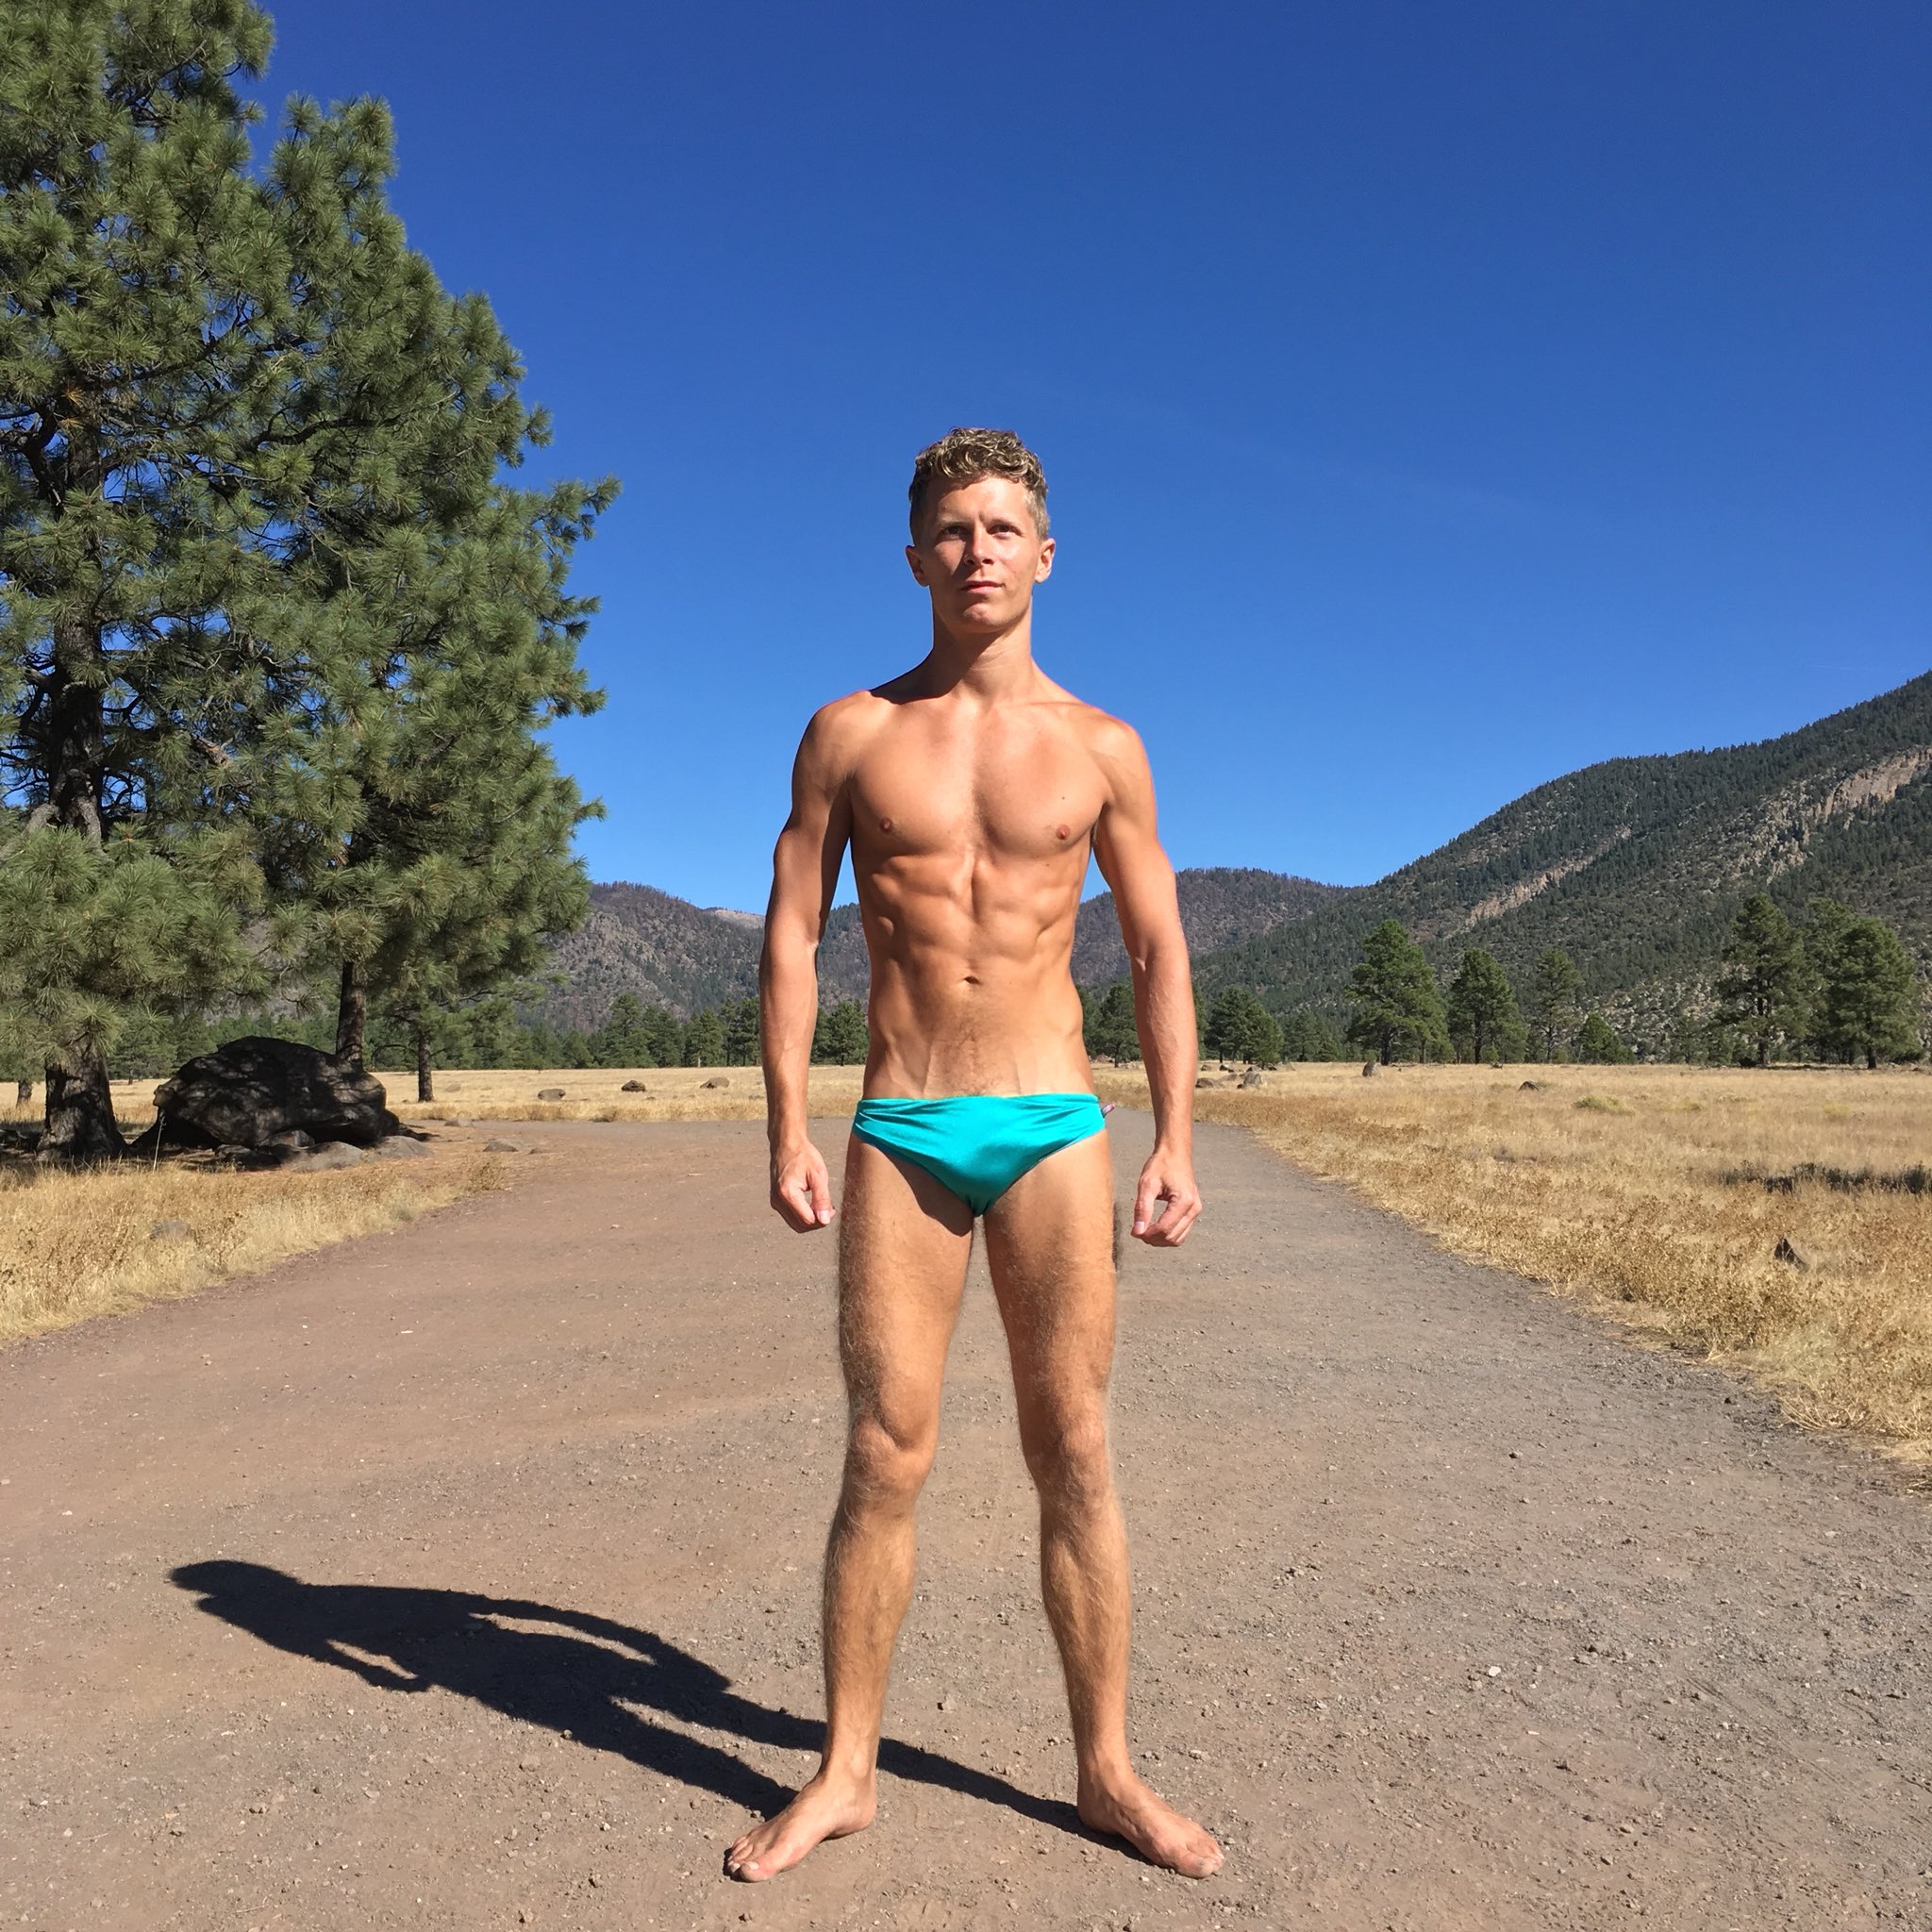 mekanisk Geometri Portal Tim Parise on Twitter: "Yesterday someone called the cops on me for wearing  a speedo at Buffalo Park in Flagstaff, so today I wore an even smaller,  brighter speedo. #flagstaff #arizona #southwest #